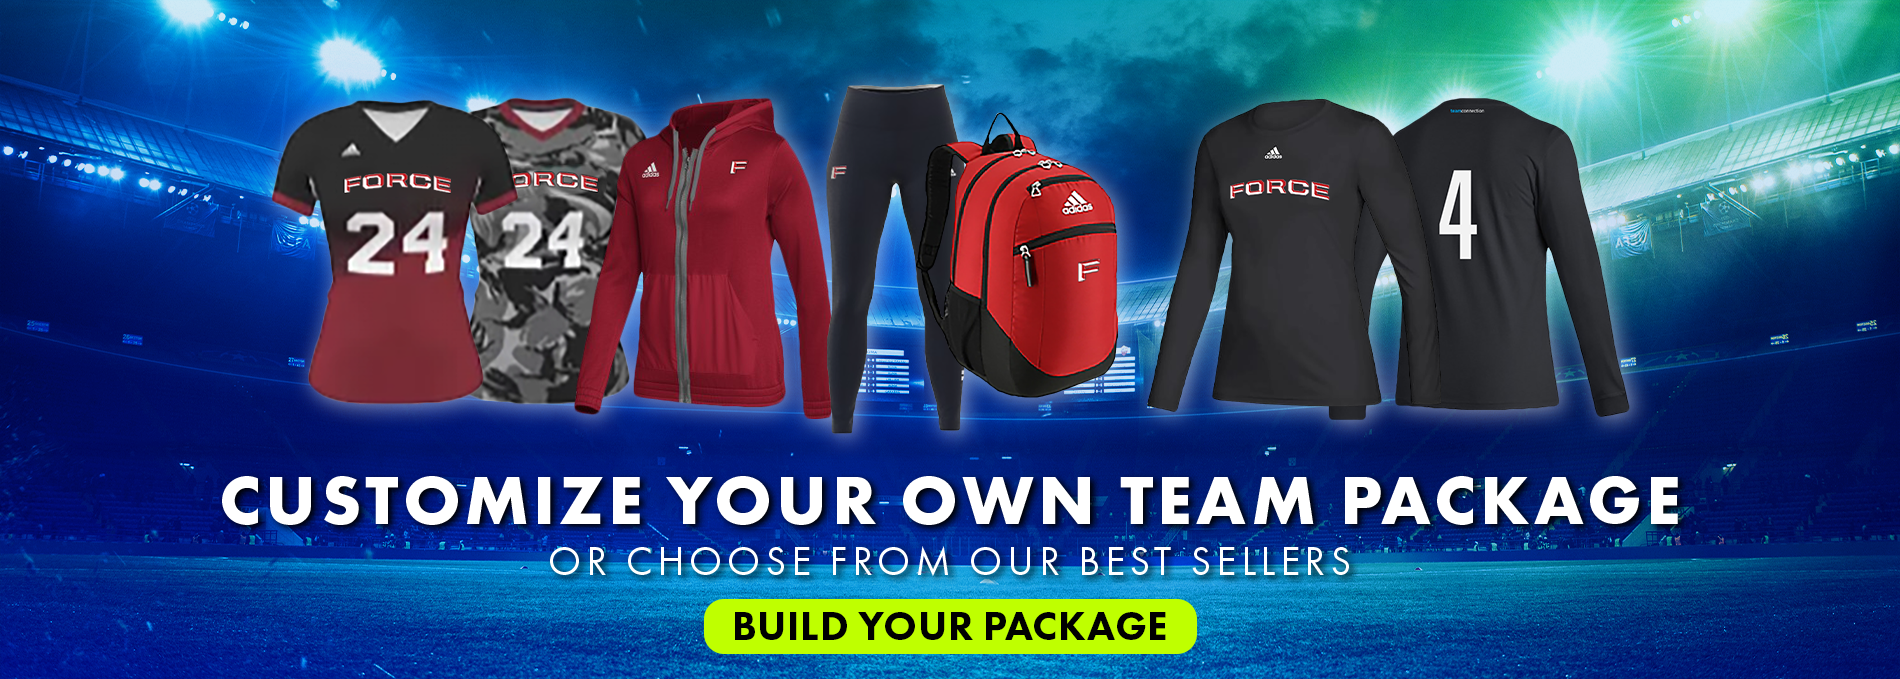 Volleyball Team Packages